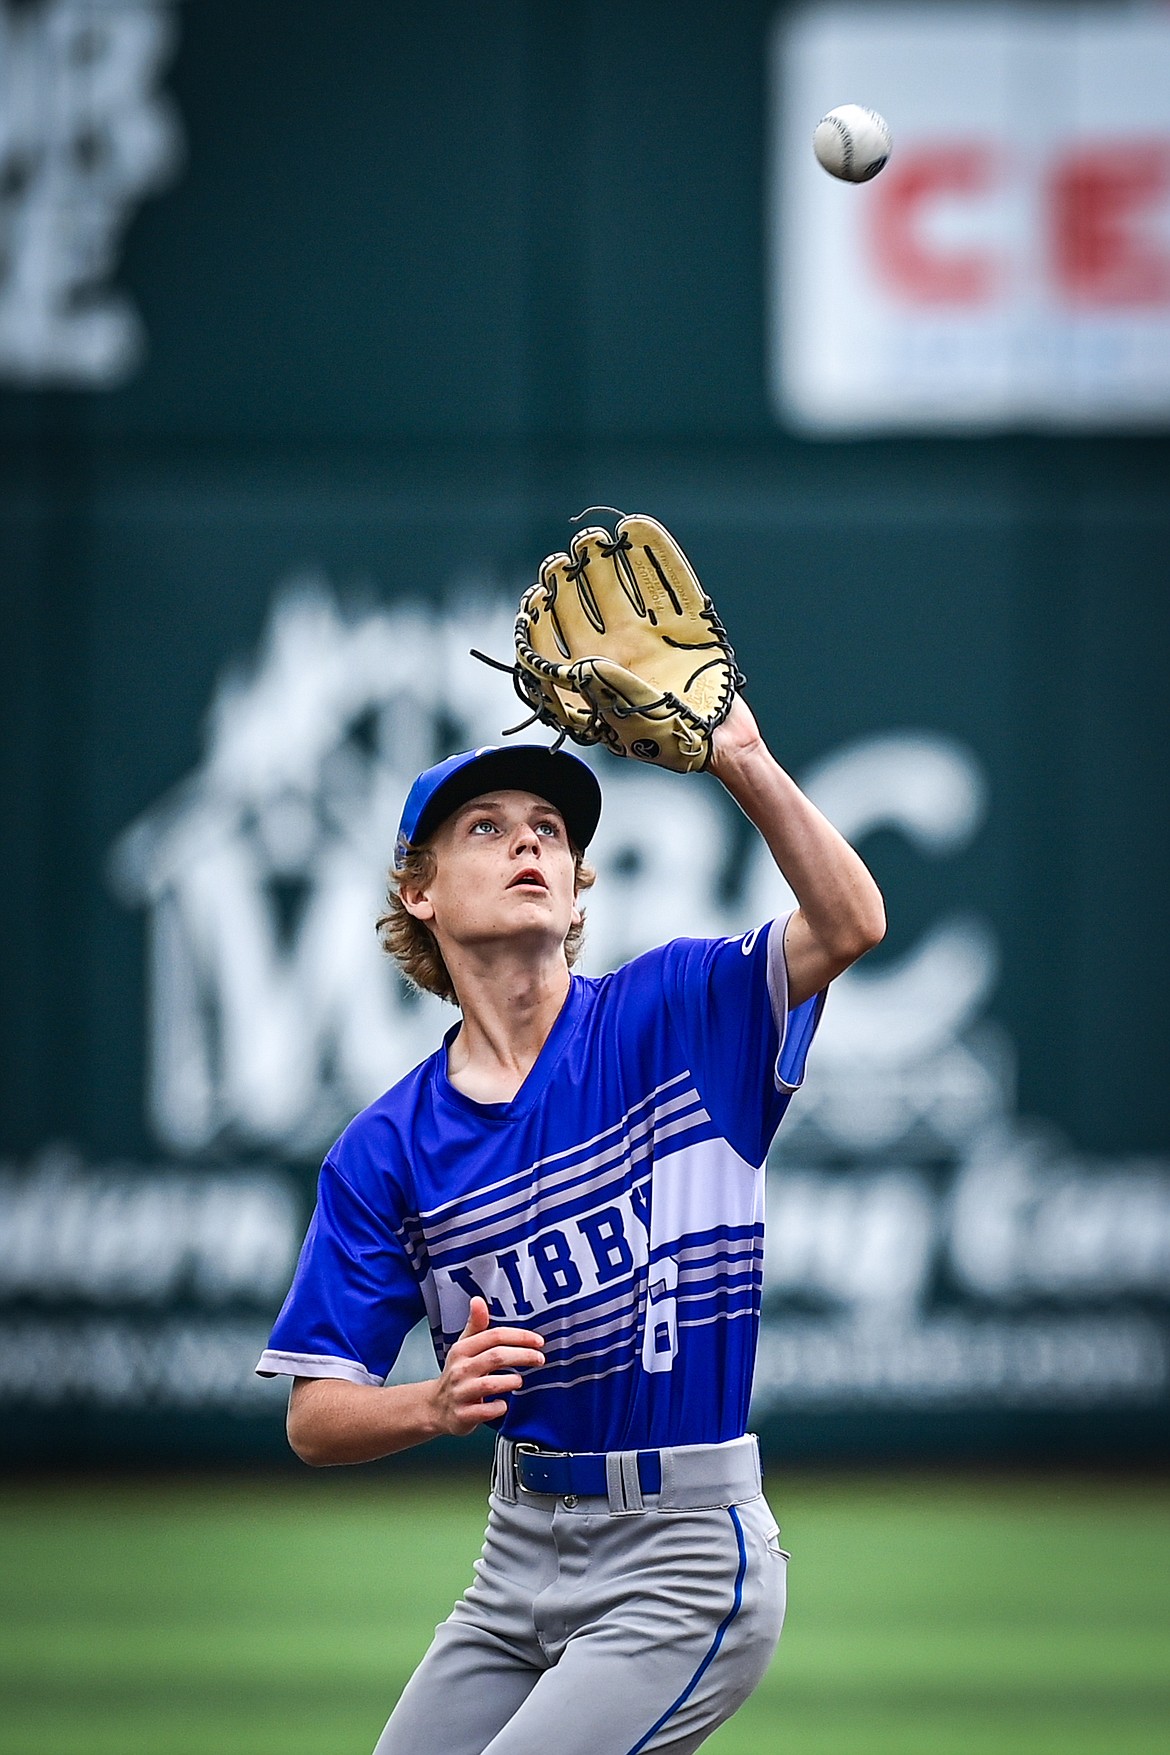 Libby second baseman Carson Wolgamott (6) makes a catch in the infield for an out against Badrock during the Badrock Invitational at Glacier Bank Park on Thursday, June 27. (Casey Kreider/Daily Inter Lake)